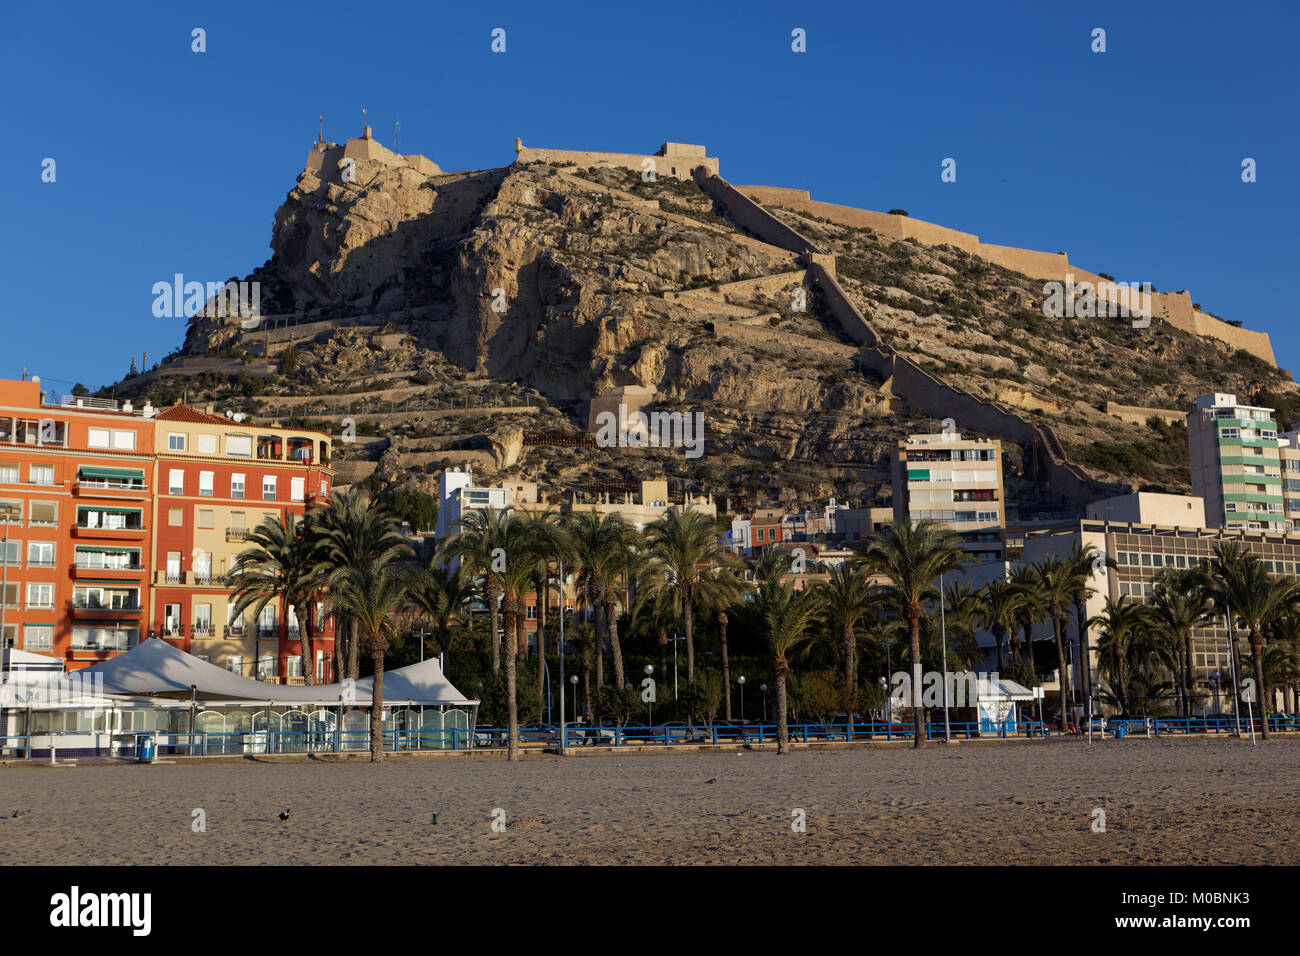 Alicante, Spain - January 08, 2013: View to Santa Barbara castle from the beach. Situated on the slopes of Mount Benacantil, the castle originated in  Stock Photo